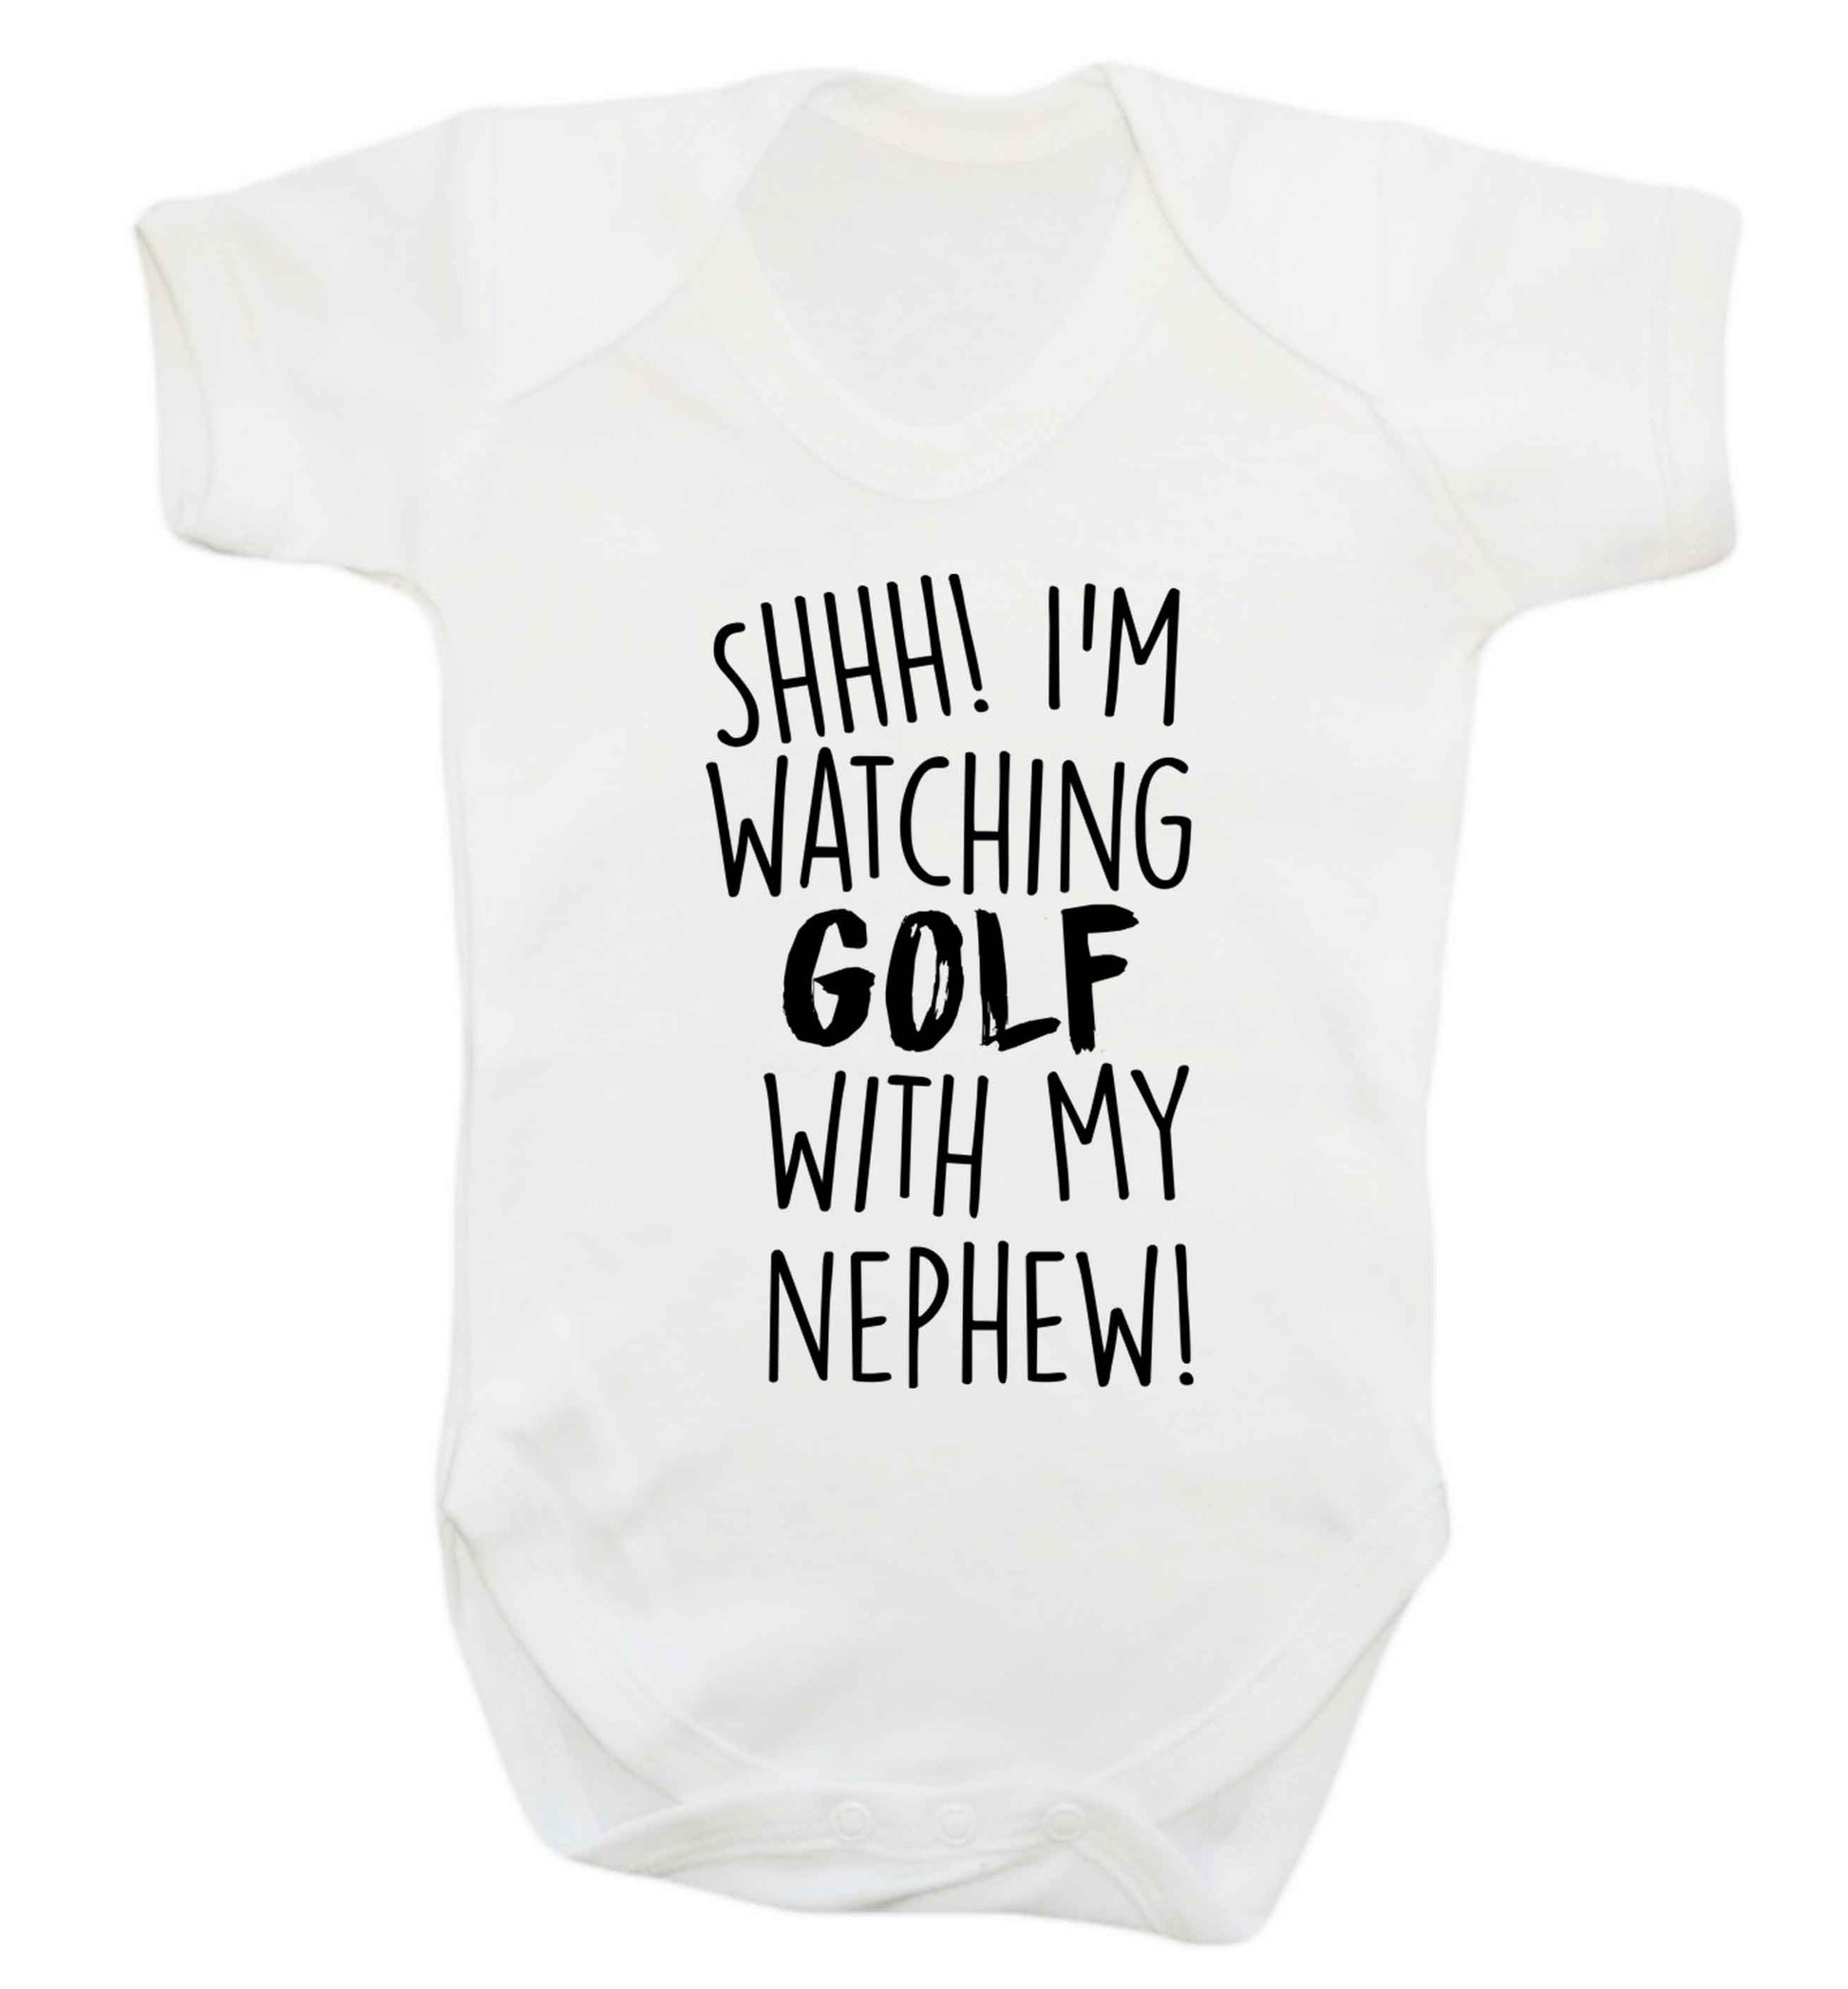 Shh I'm watching golf with my nephew Baby Vest white 18-24 months